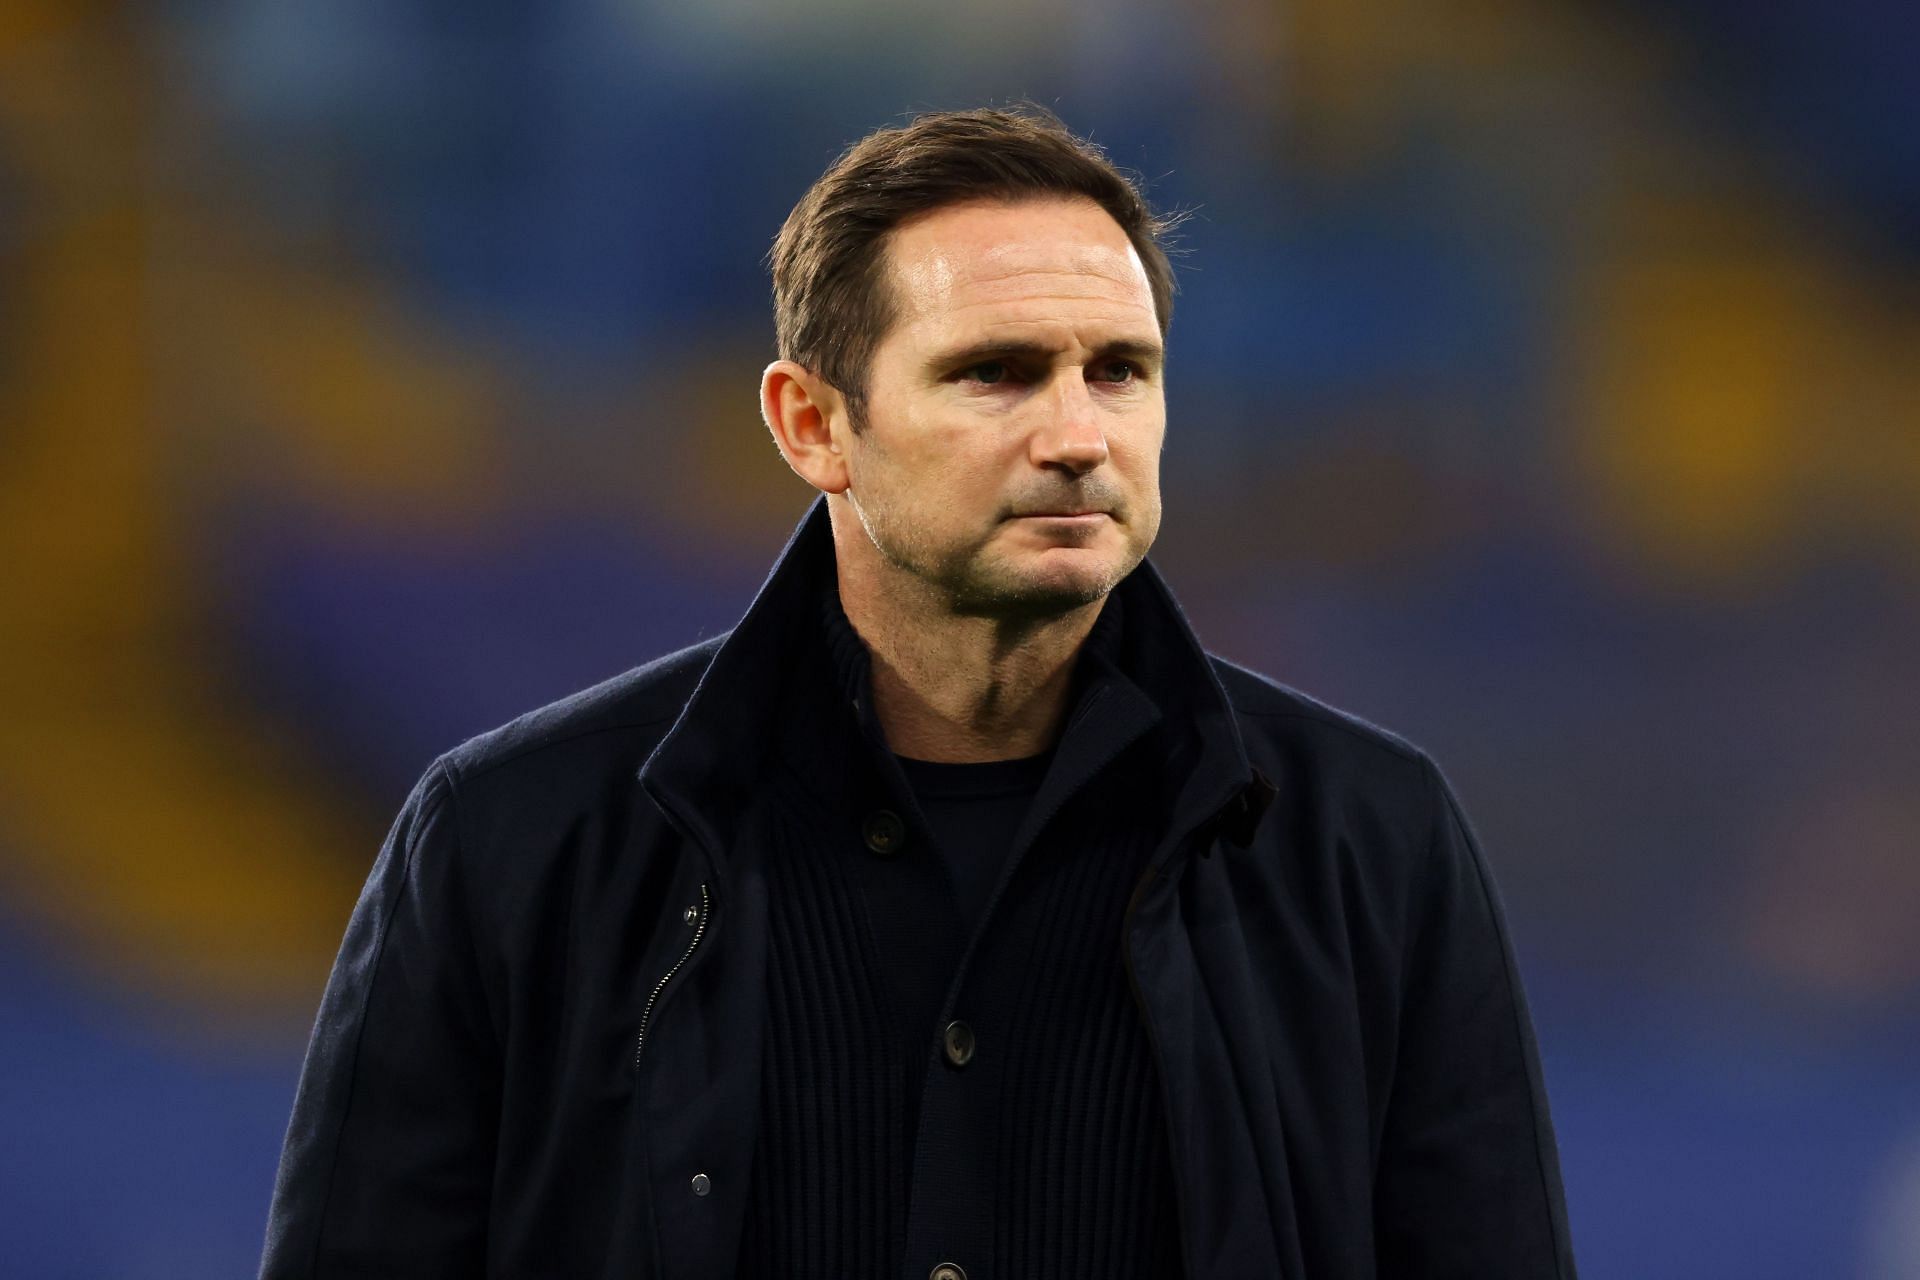 Lampard built an exciting generation of youngsters at Stamford Bridge.